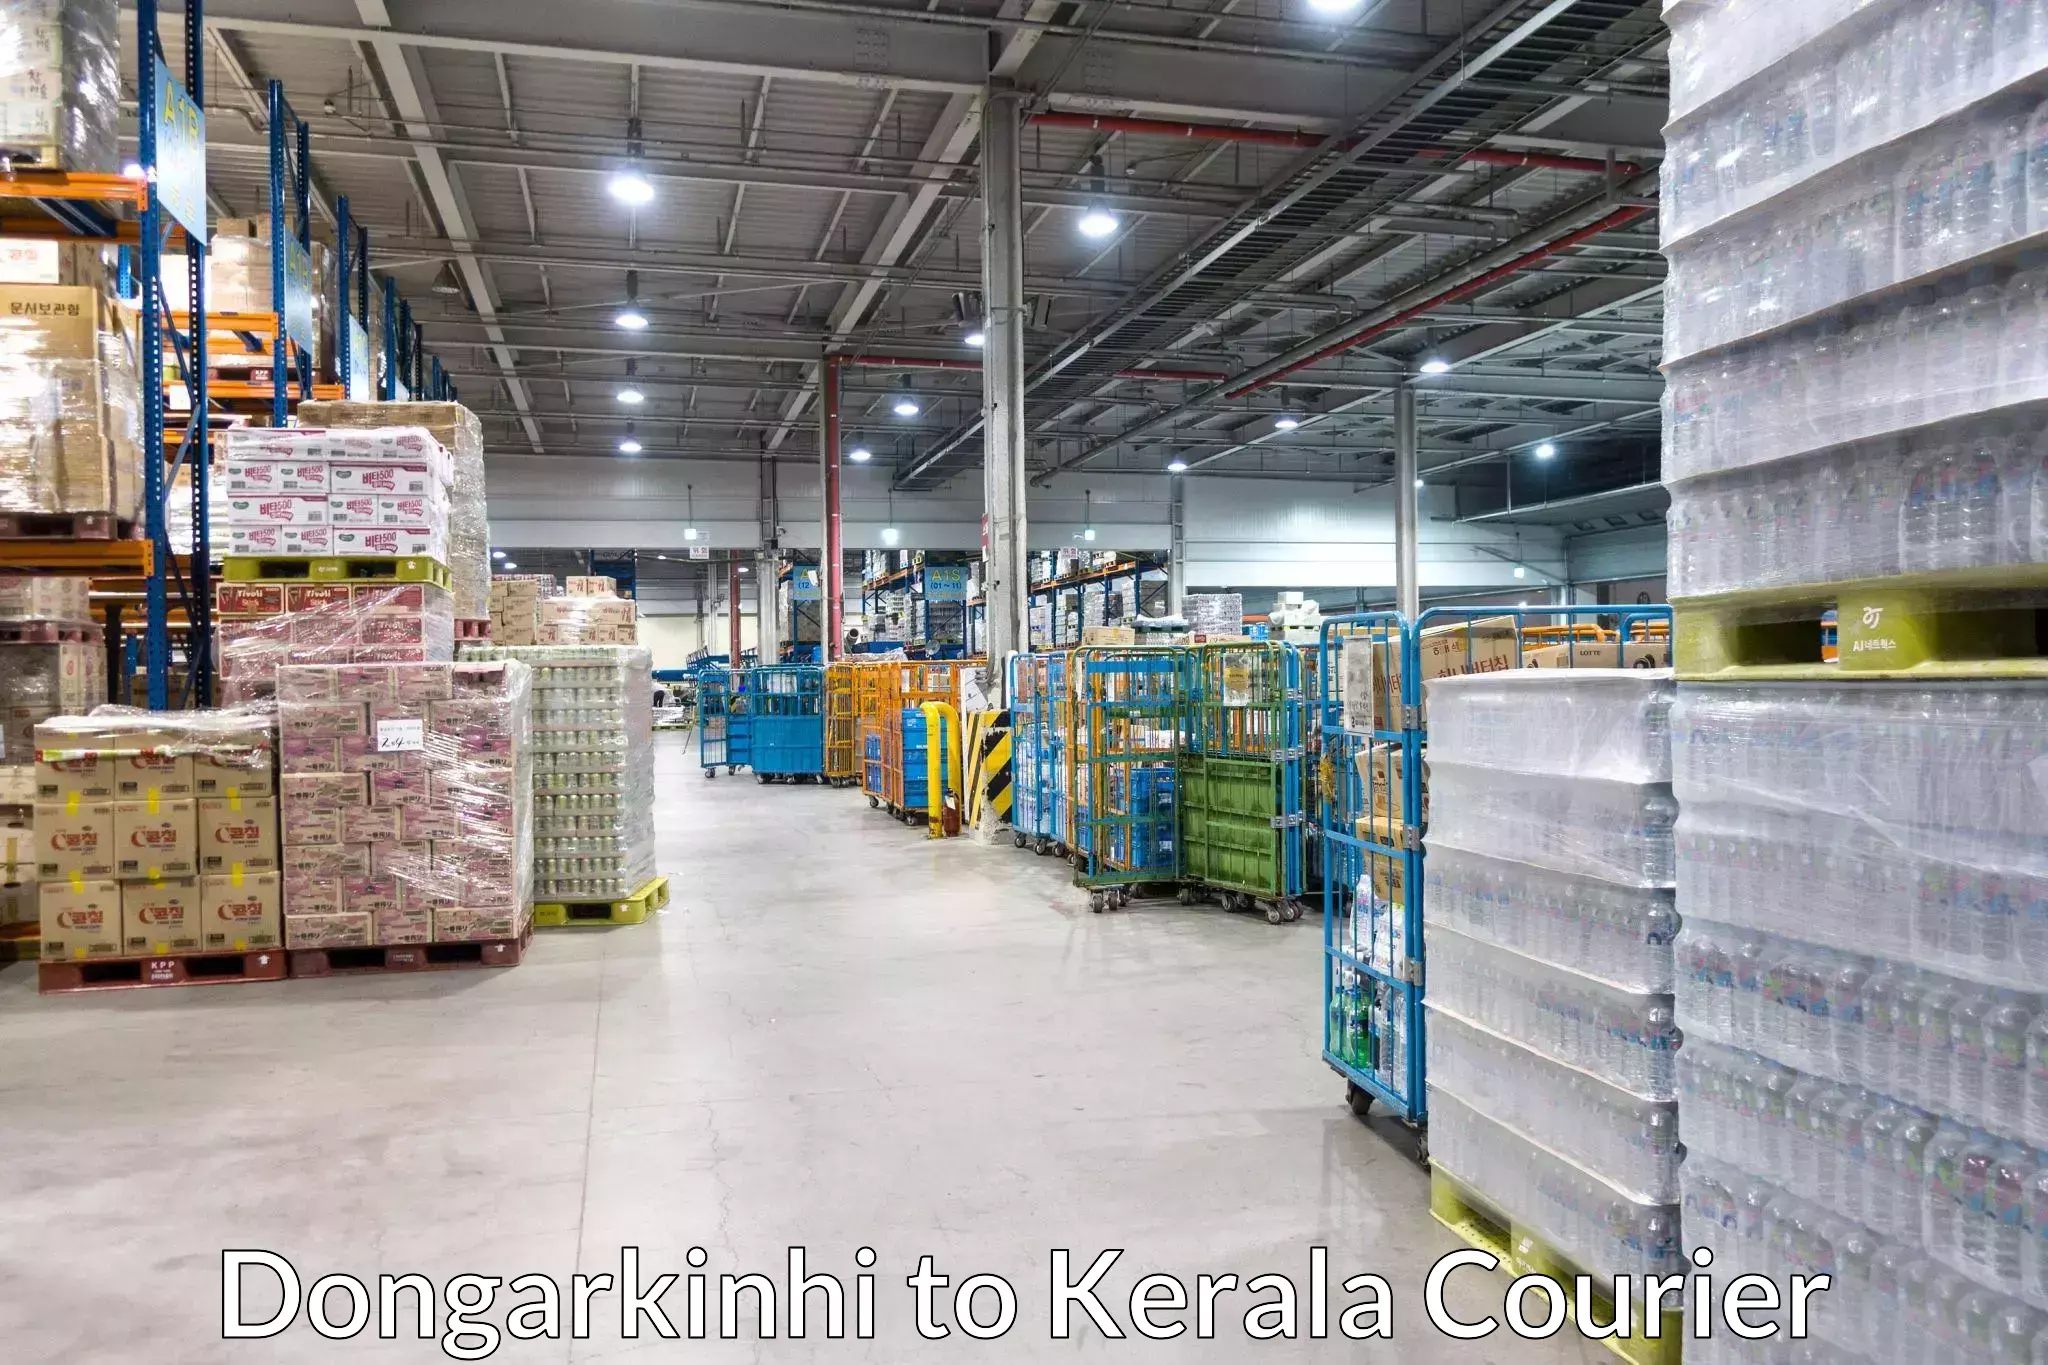 Corporate courier solutions Dongarkinhi to Kerala